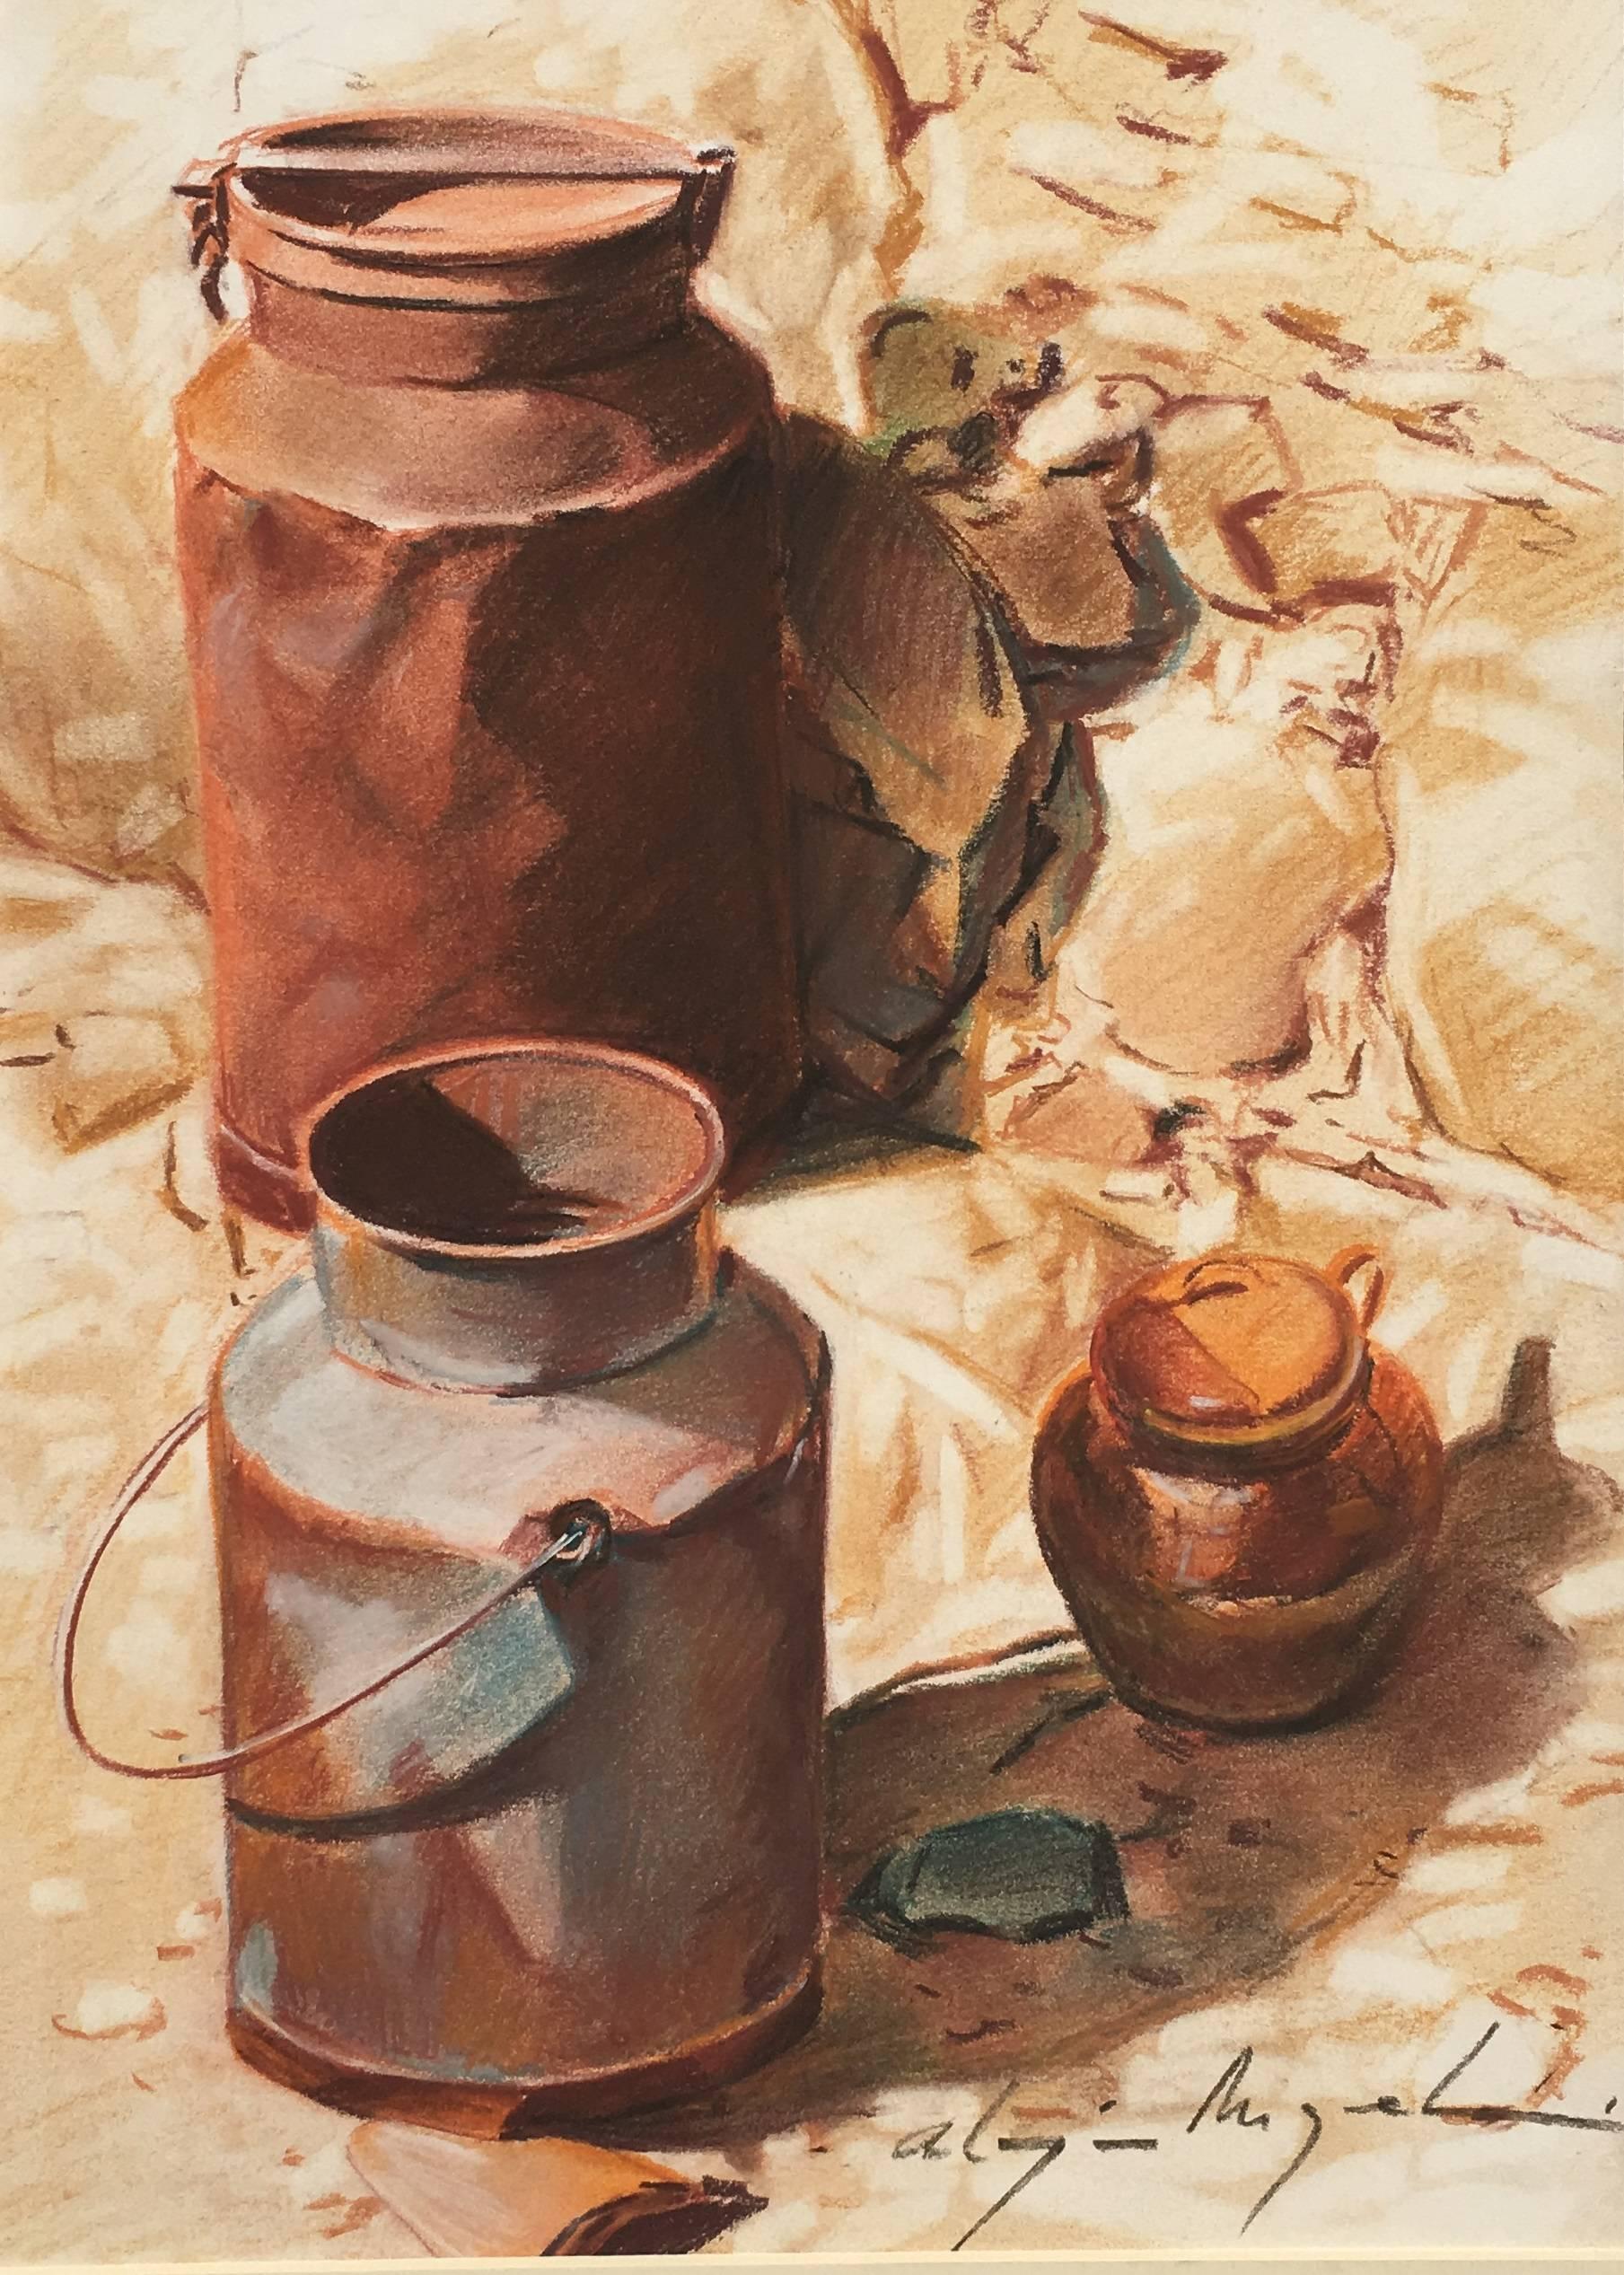 Almazan Realistic Still Life watercolor Painting
 MIQUEL was an artist focused on the art of realism. His structured works on his great mastery of drawing, are romantic and translates us to past times ...
Beautiful works on paper.
